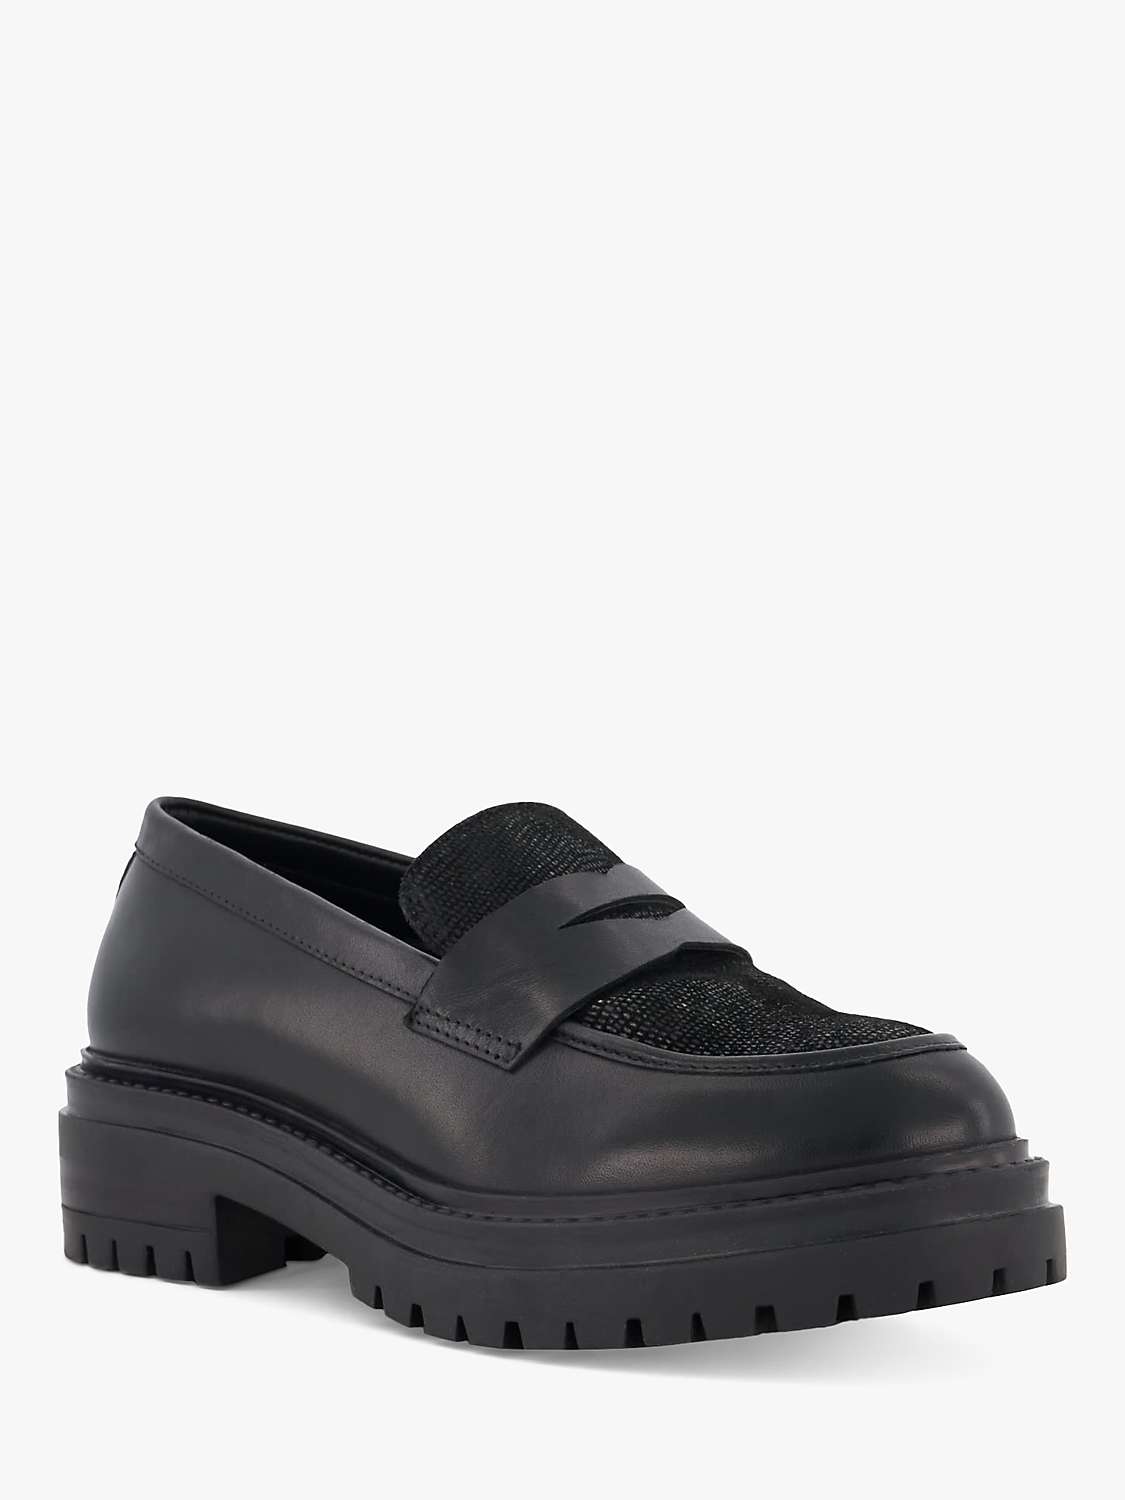 Buy Dune Gaining Leather Loafers, Black Online at johnlewis.com